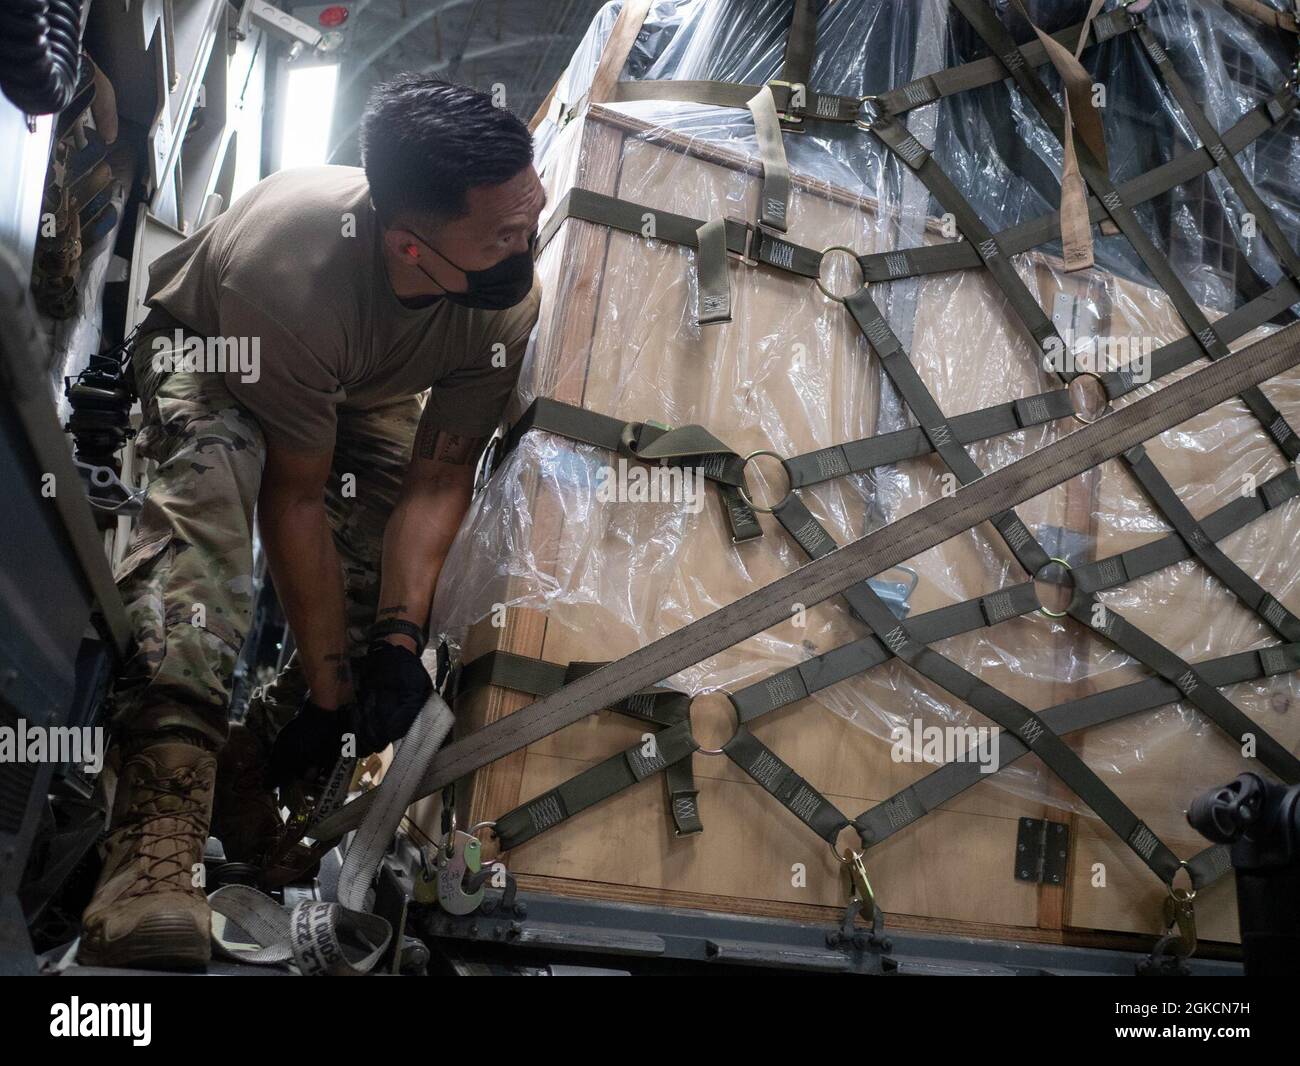 Tech. Sgt. Dennis Dedicatoria, 154th Logistics Readiness Squadron air transportation specialist, secures a pallet on a C-17 Globemaster III March 14, 2021 at Joint Base Pearl Harbor-Hickam, Hawaii. Support personnel were airlifted to Marine Corps Air Station Iwakuni, Japan, to rendezvous with Hawaii-based F-22 Raptors and conduct training operations with U.S. Marine Corps units. Pacific Air Forces’ fighters stand ready to support the global strategic environment as it continues to demand flexibility and freedom of action. Stock Photo